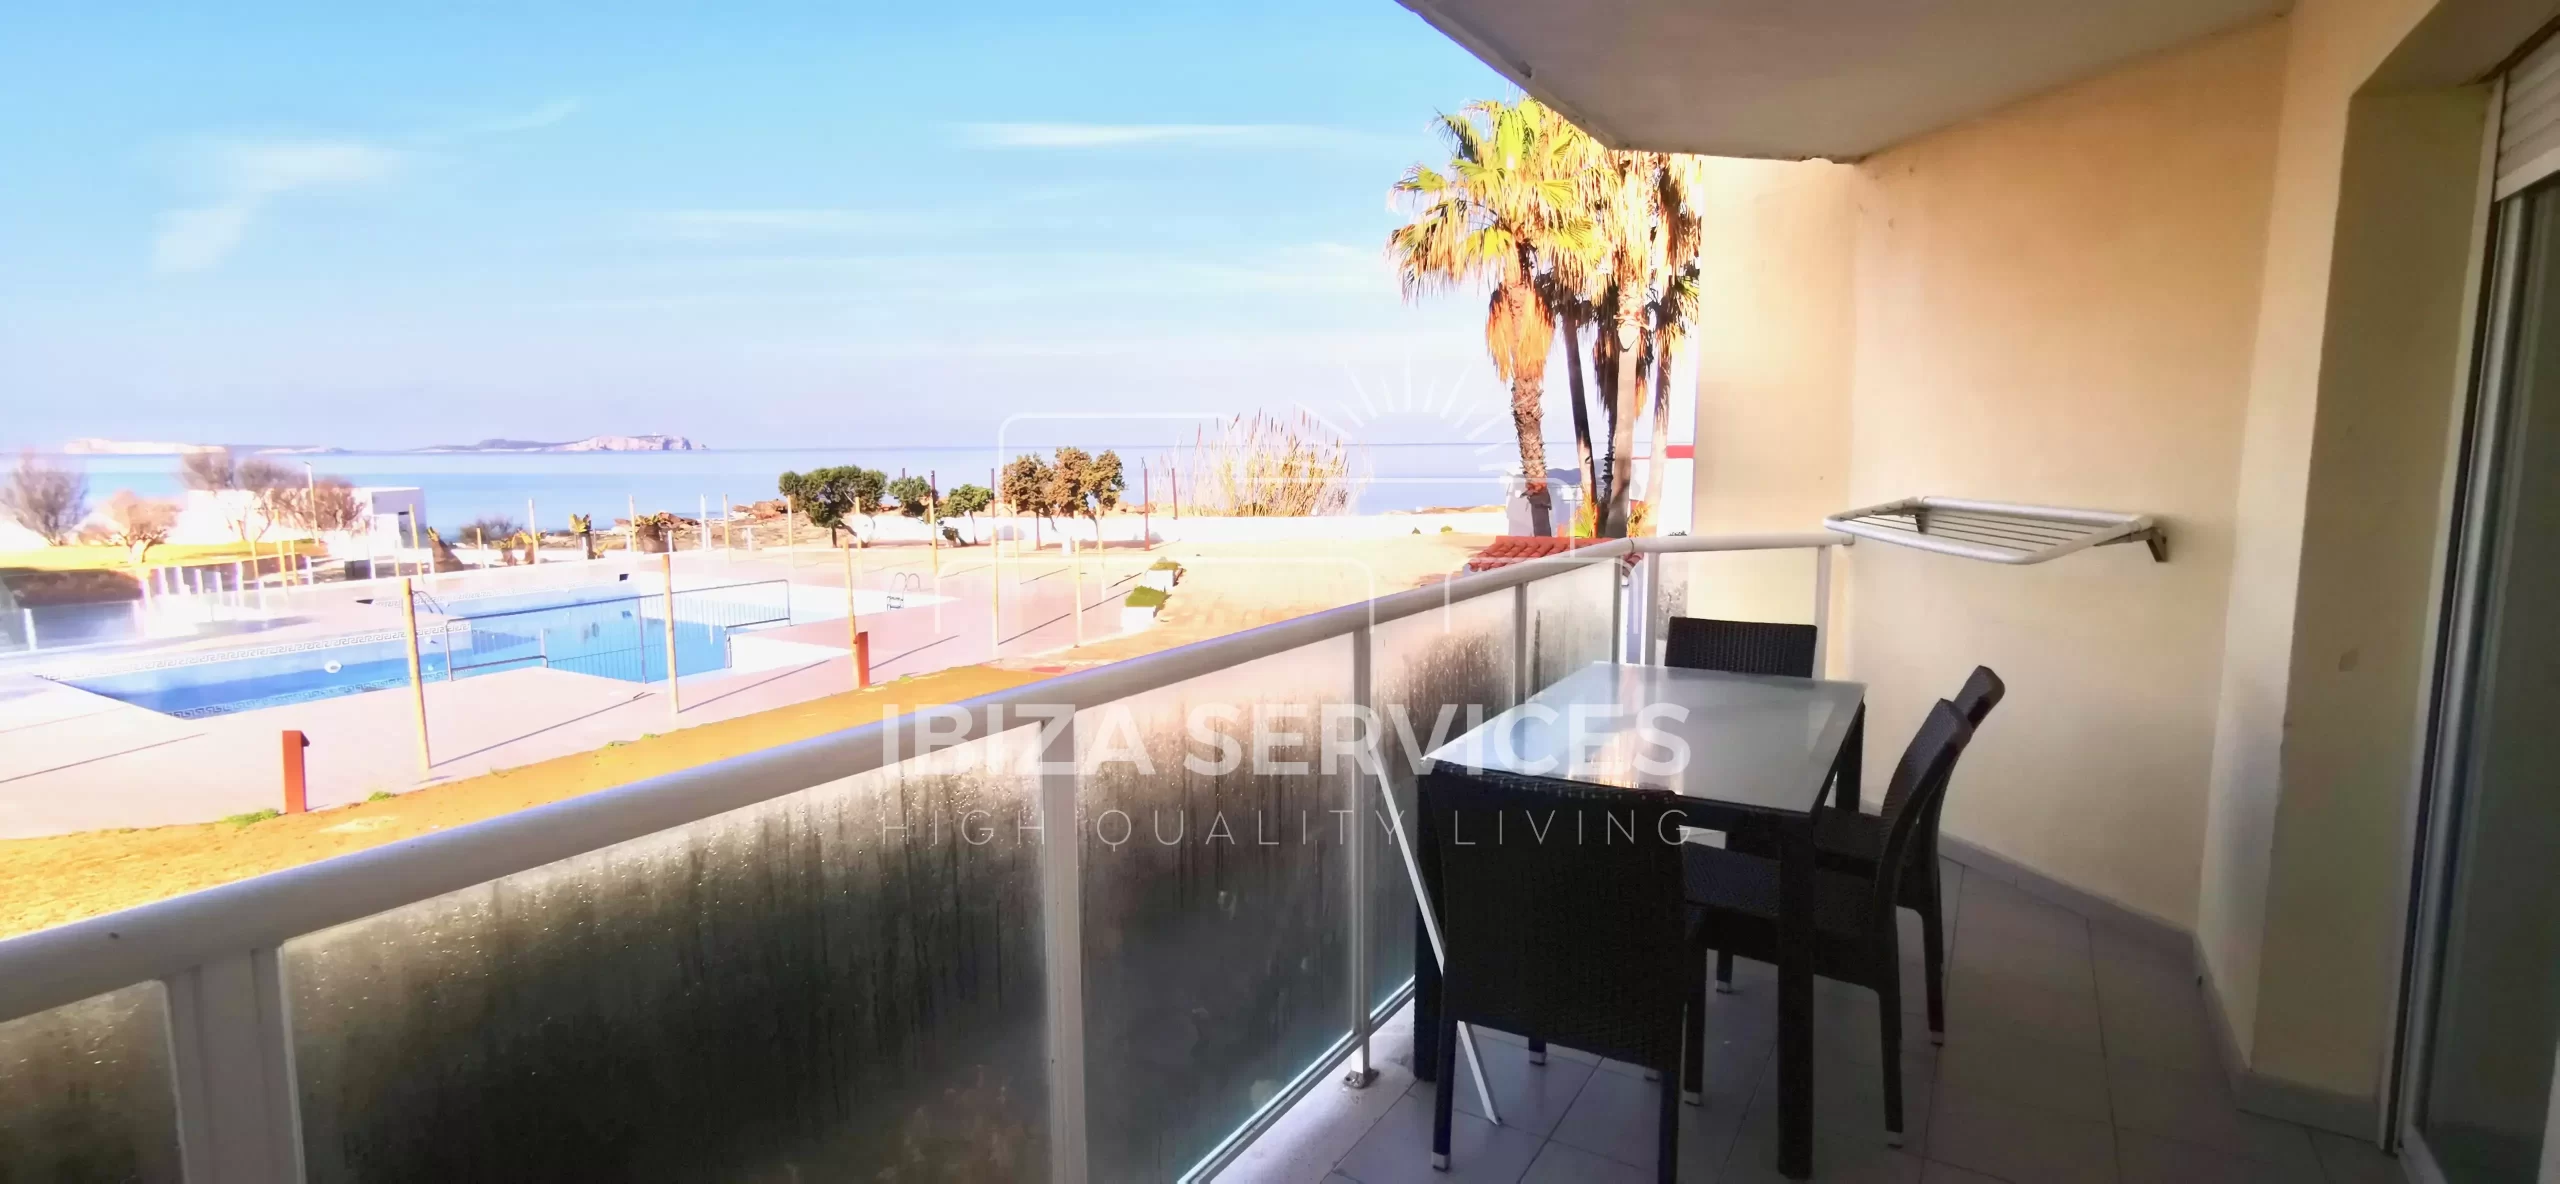 Spacious Apartment with Sea Views for Sale in Ibiza’s West Coast.